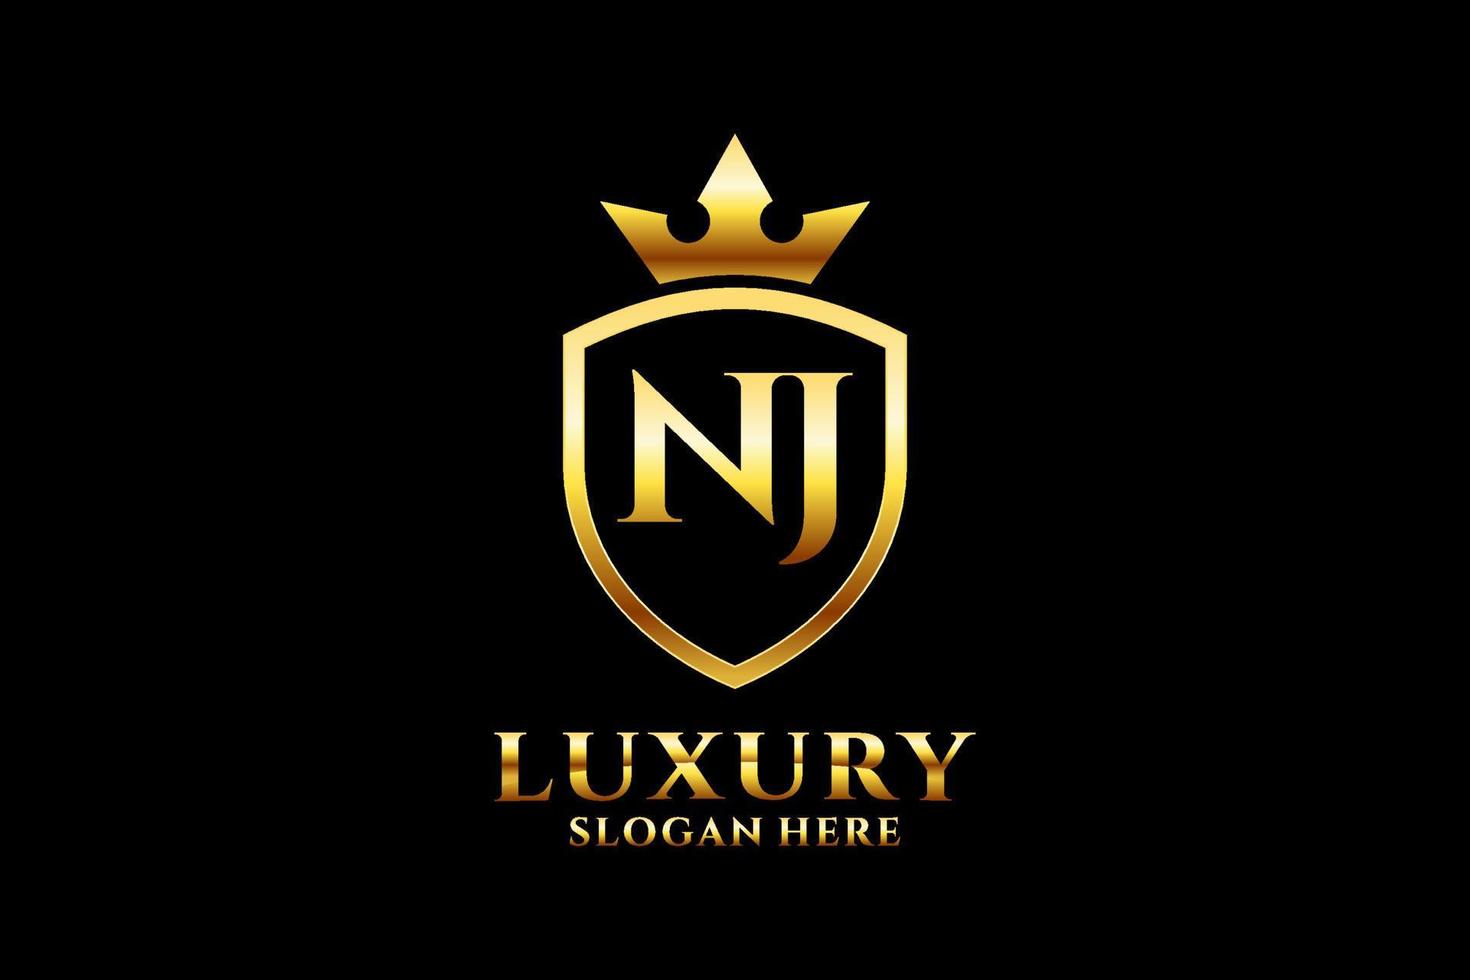 initial NJ elegant luxury monogram logo or badge template with scrolls and royal crown - perfect for luxurious branding projects vector